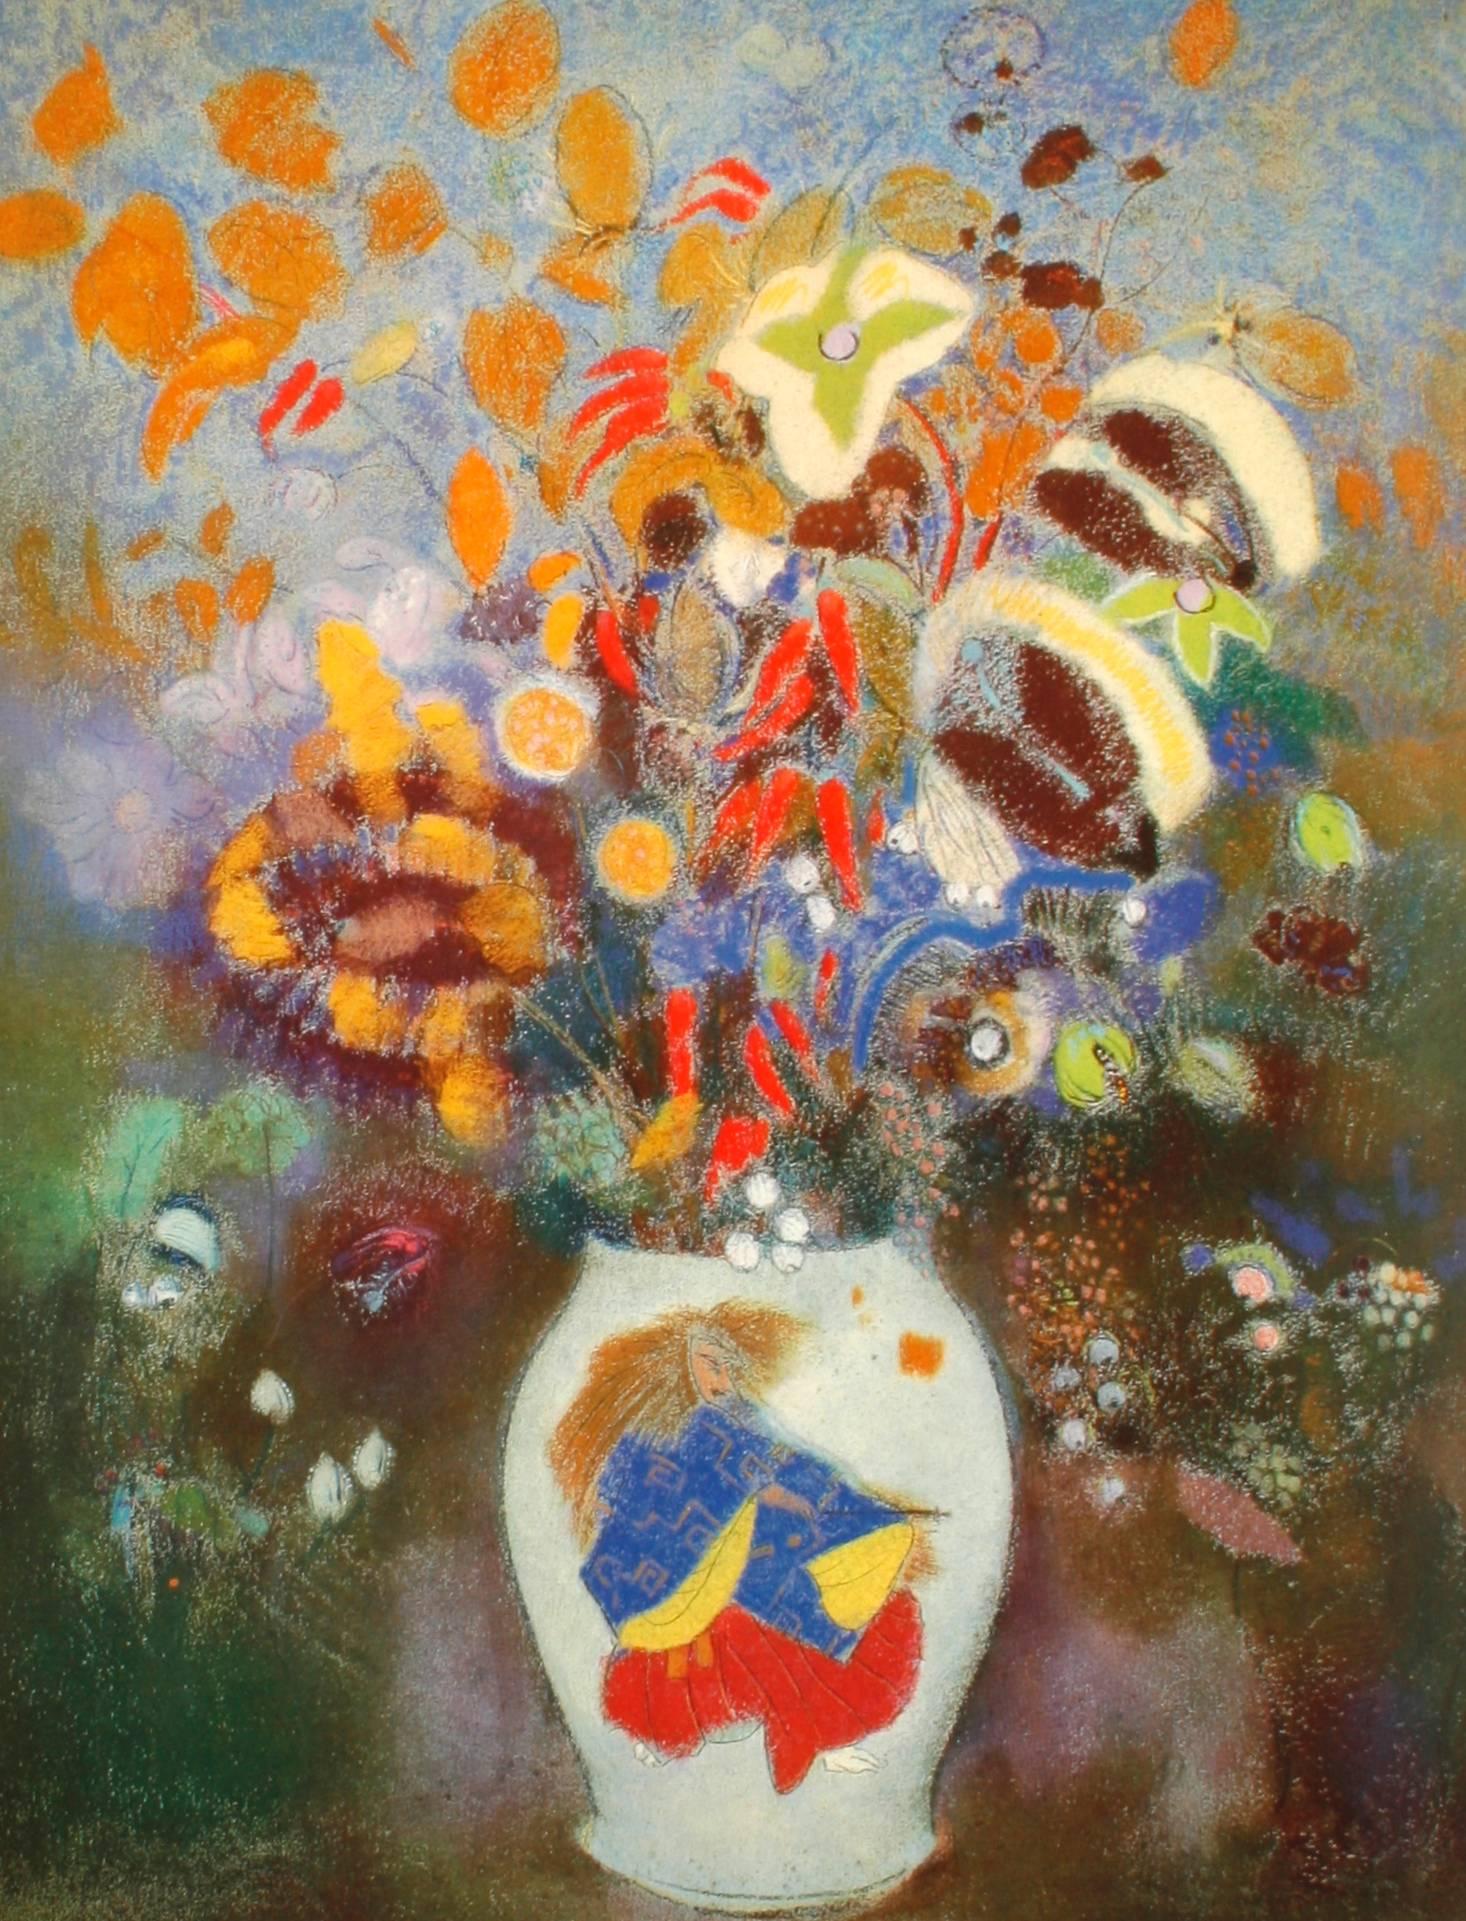 “Odilon Redon”, Fantasy and Color by Klaus bergere. McGraw-Hill, 1965. First American edition hardcover with dust jacket. Redon started drawing as a child, and at the age of ten he was awarded a drawing prize at school. At 15, he began the formal